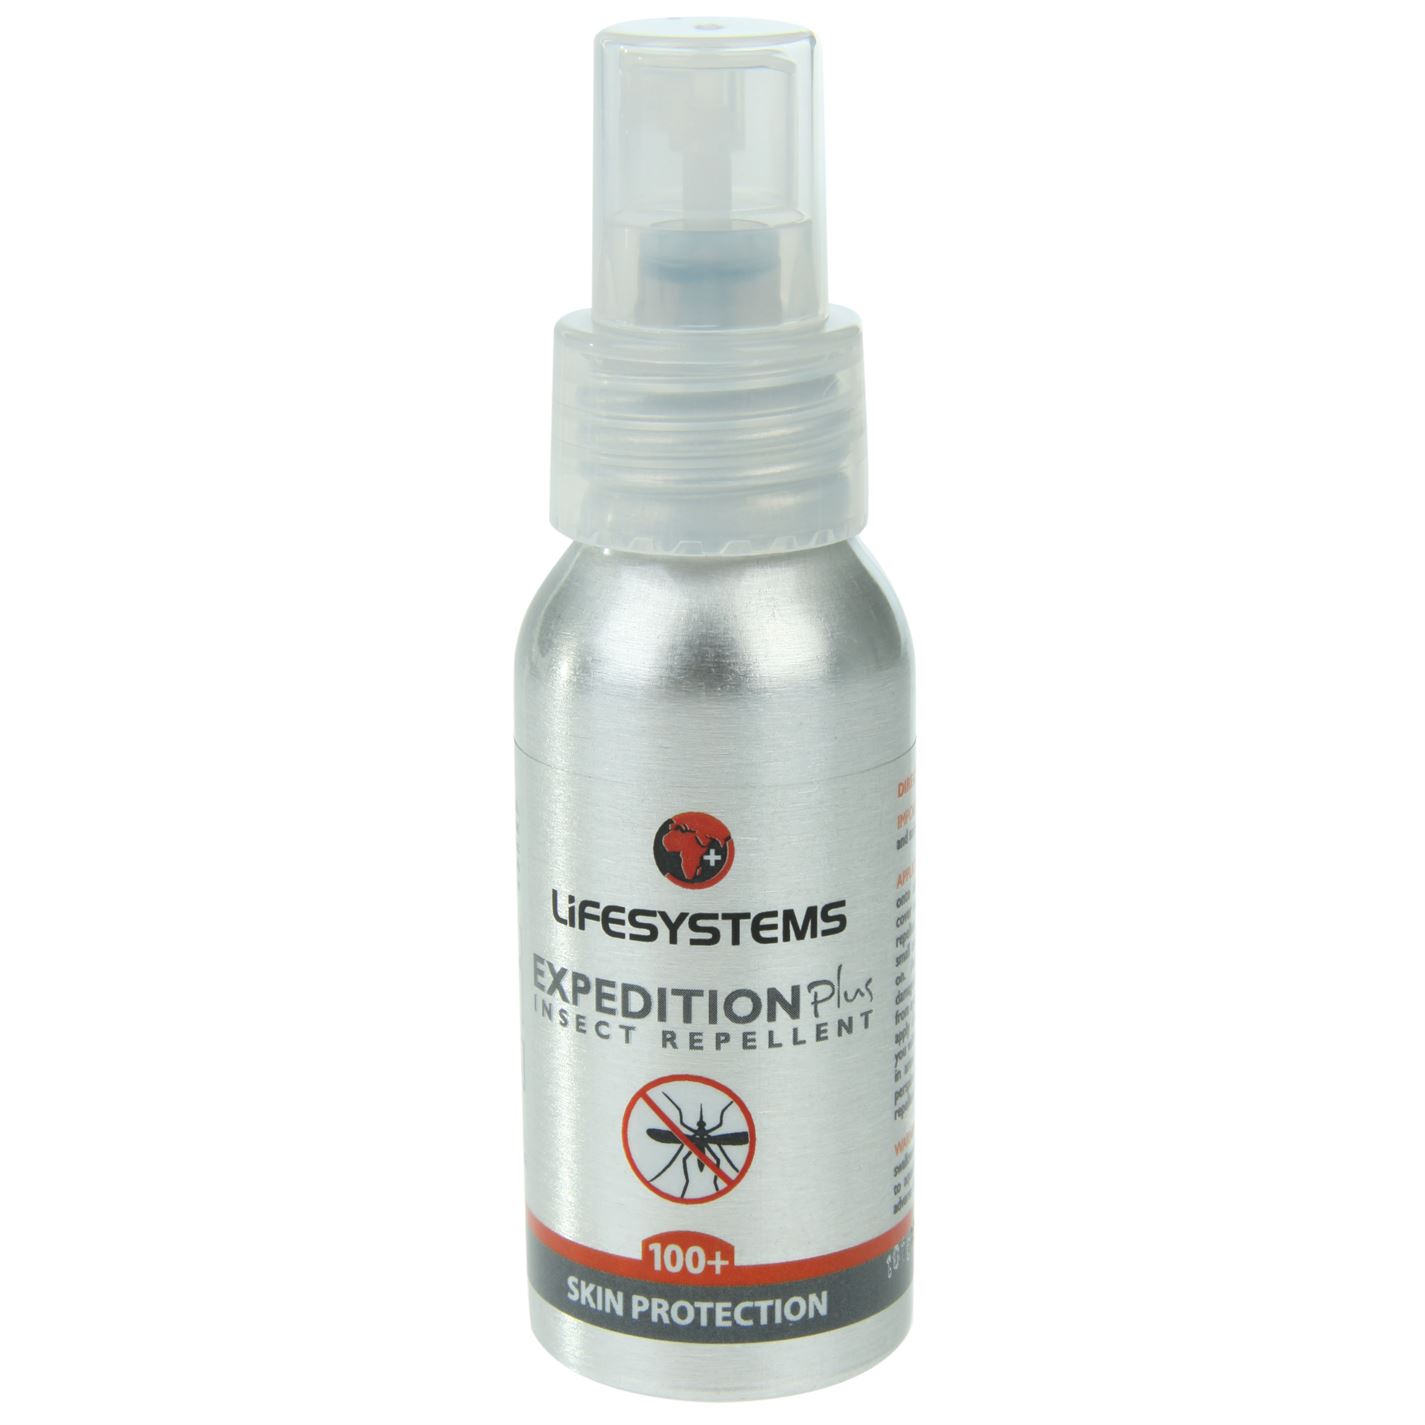 LifeSystems Expedition Plus Insect Repellent